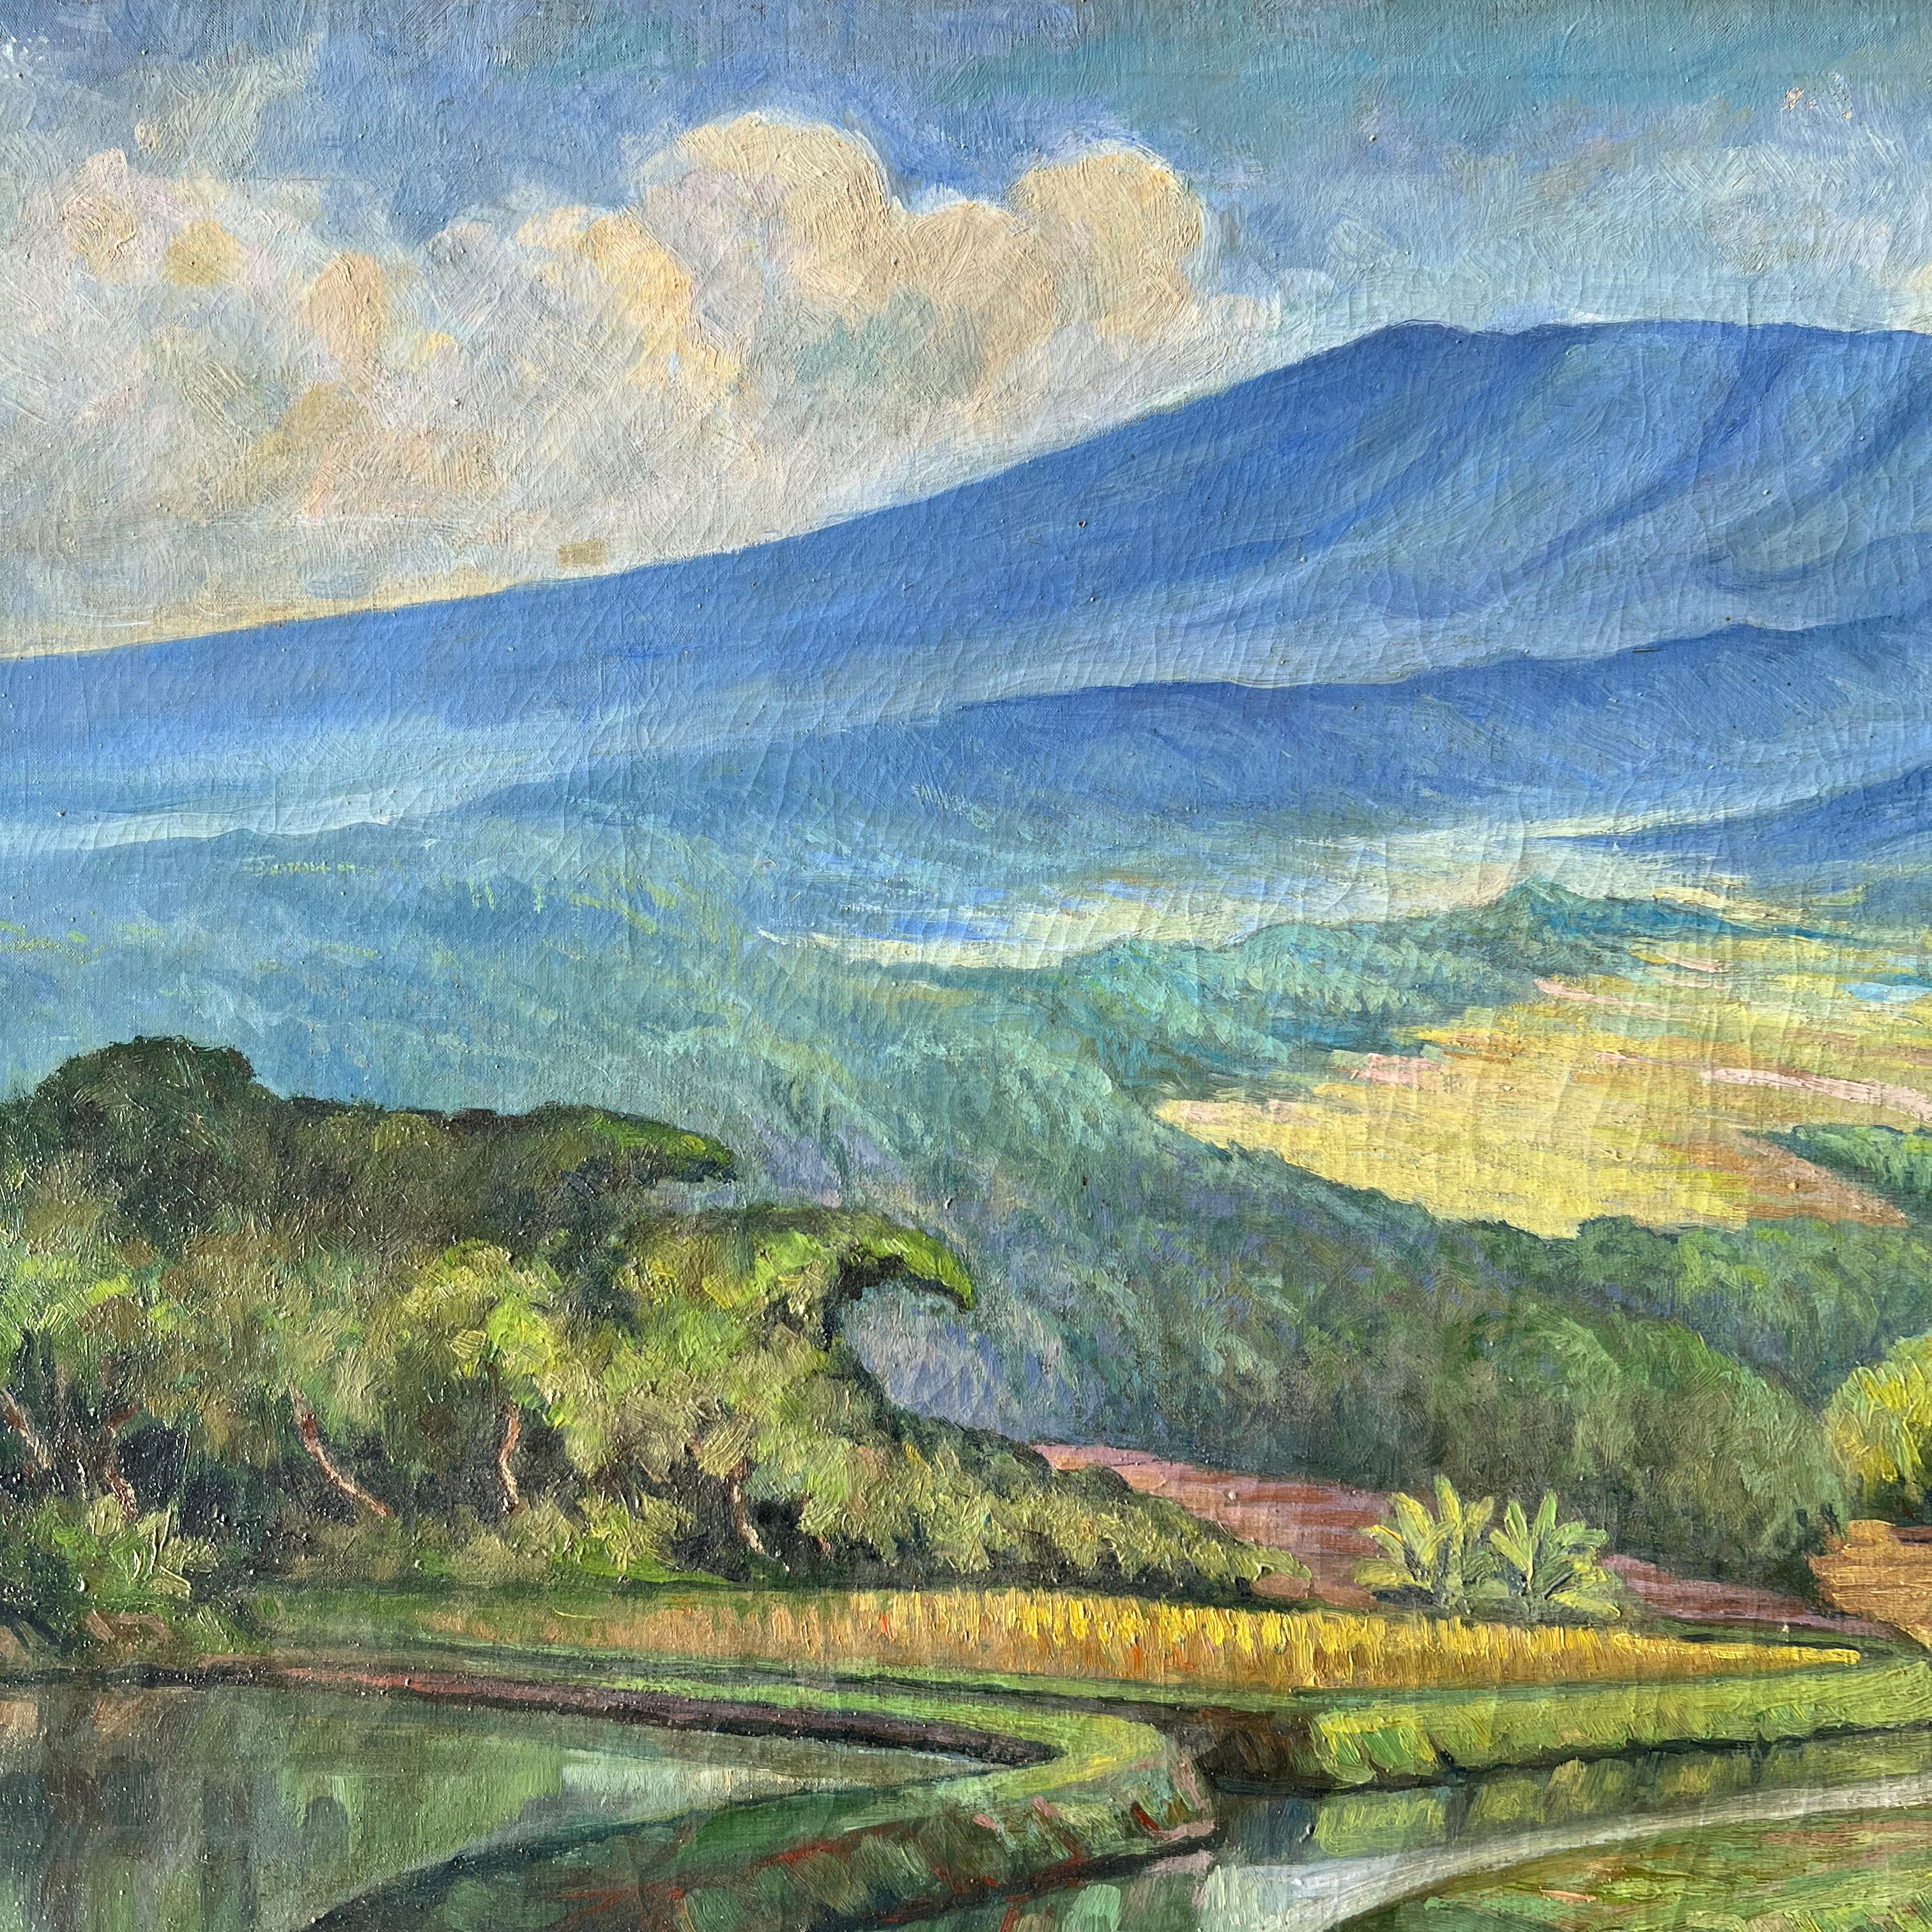 Other Rice Fields on Bali - Oil on canvas For Sale